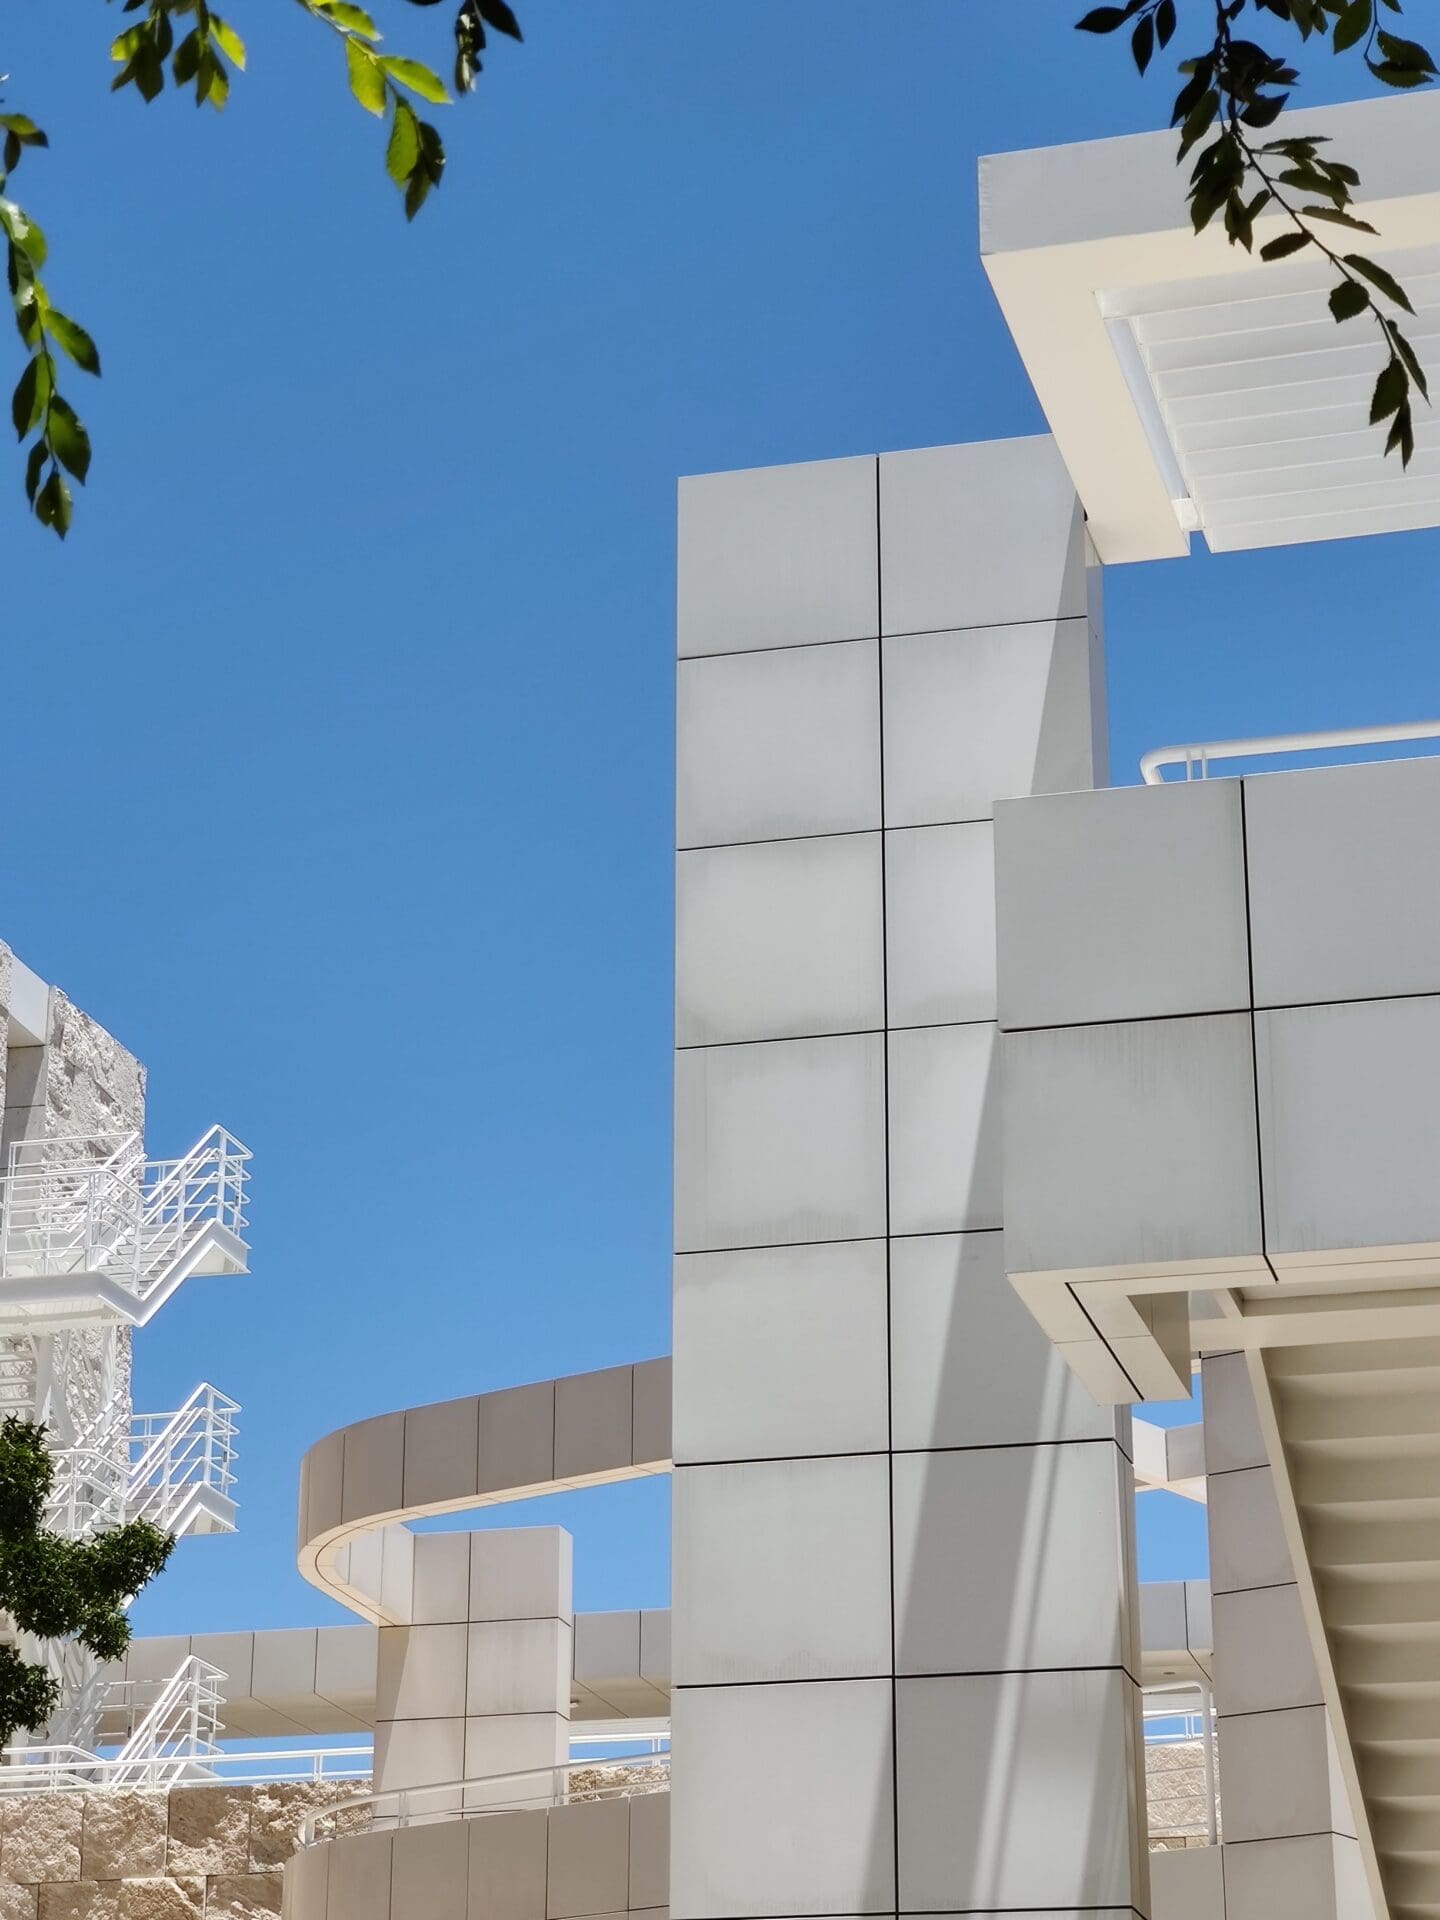 The best museums and galleries in London | The architecture of The Getty Center